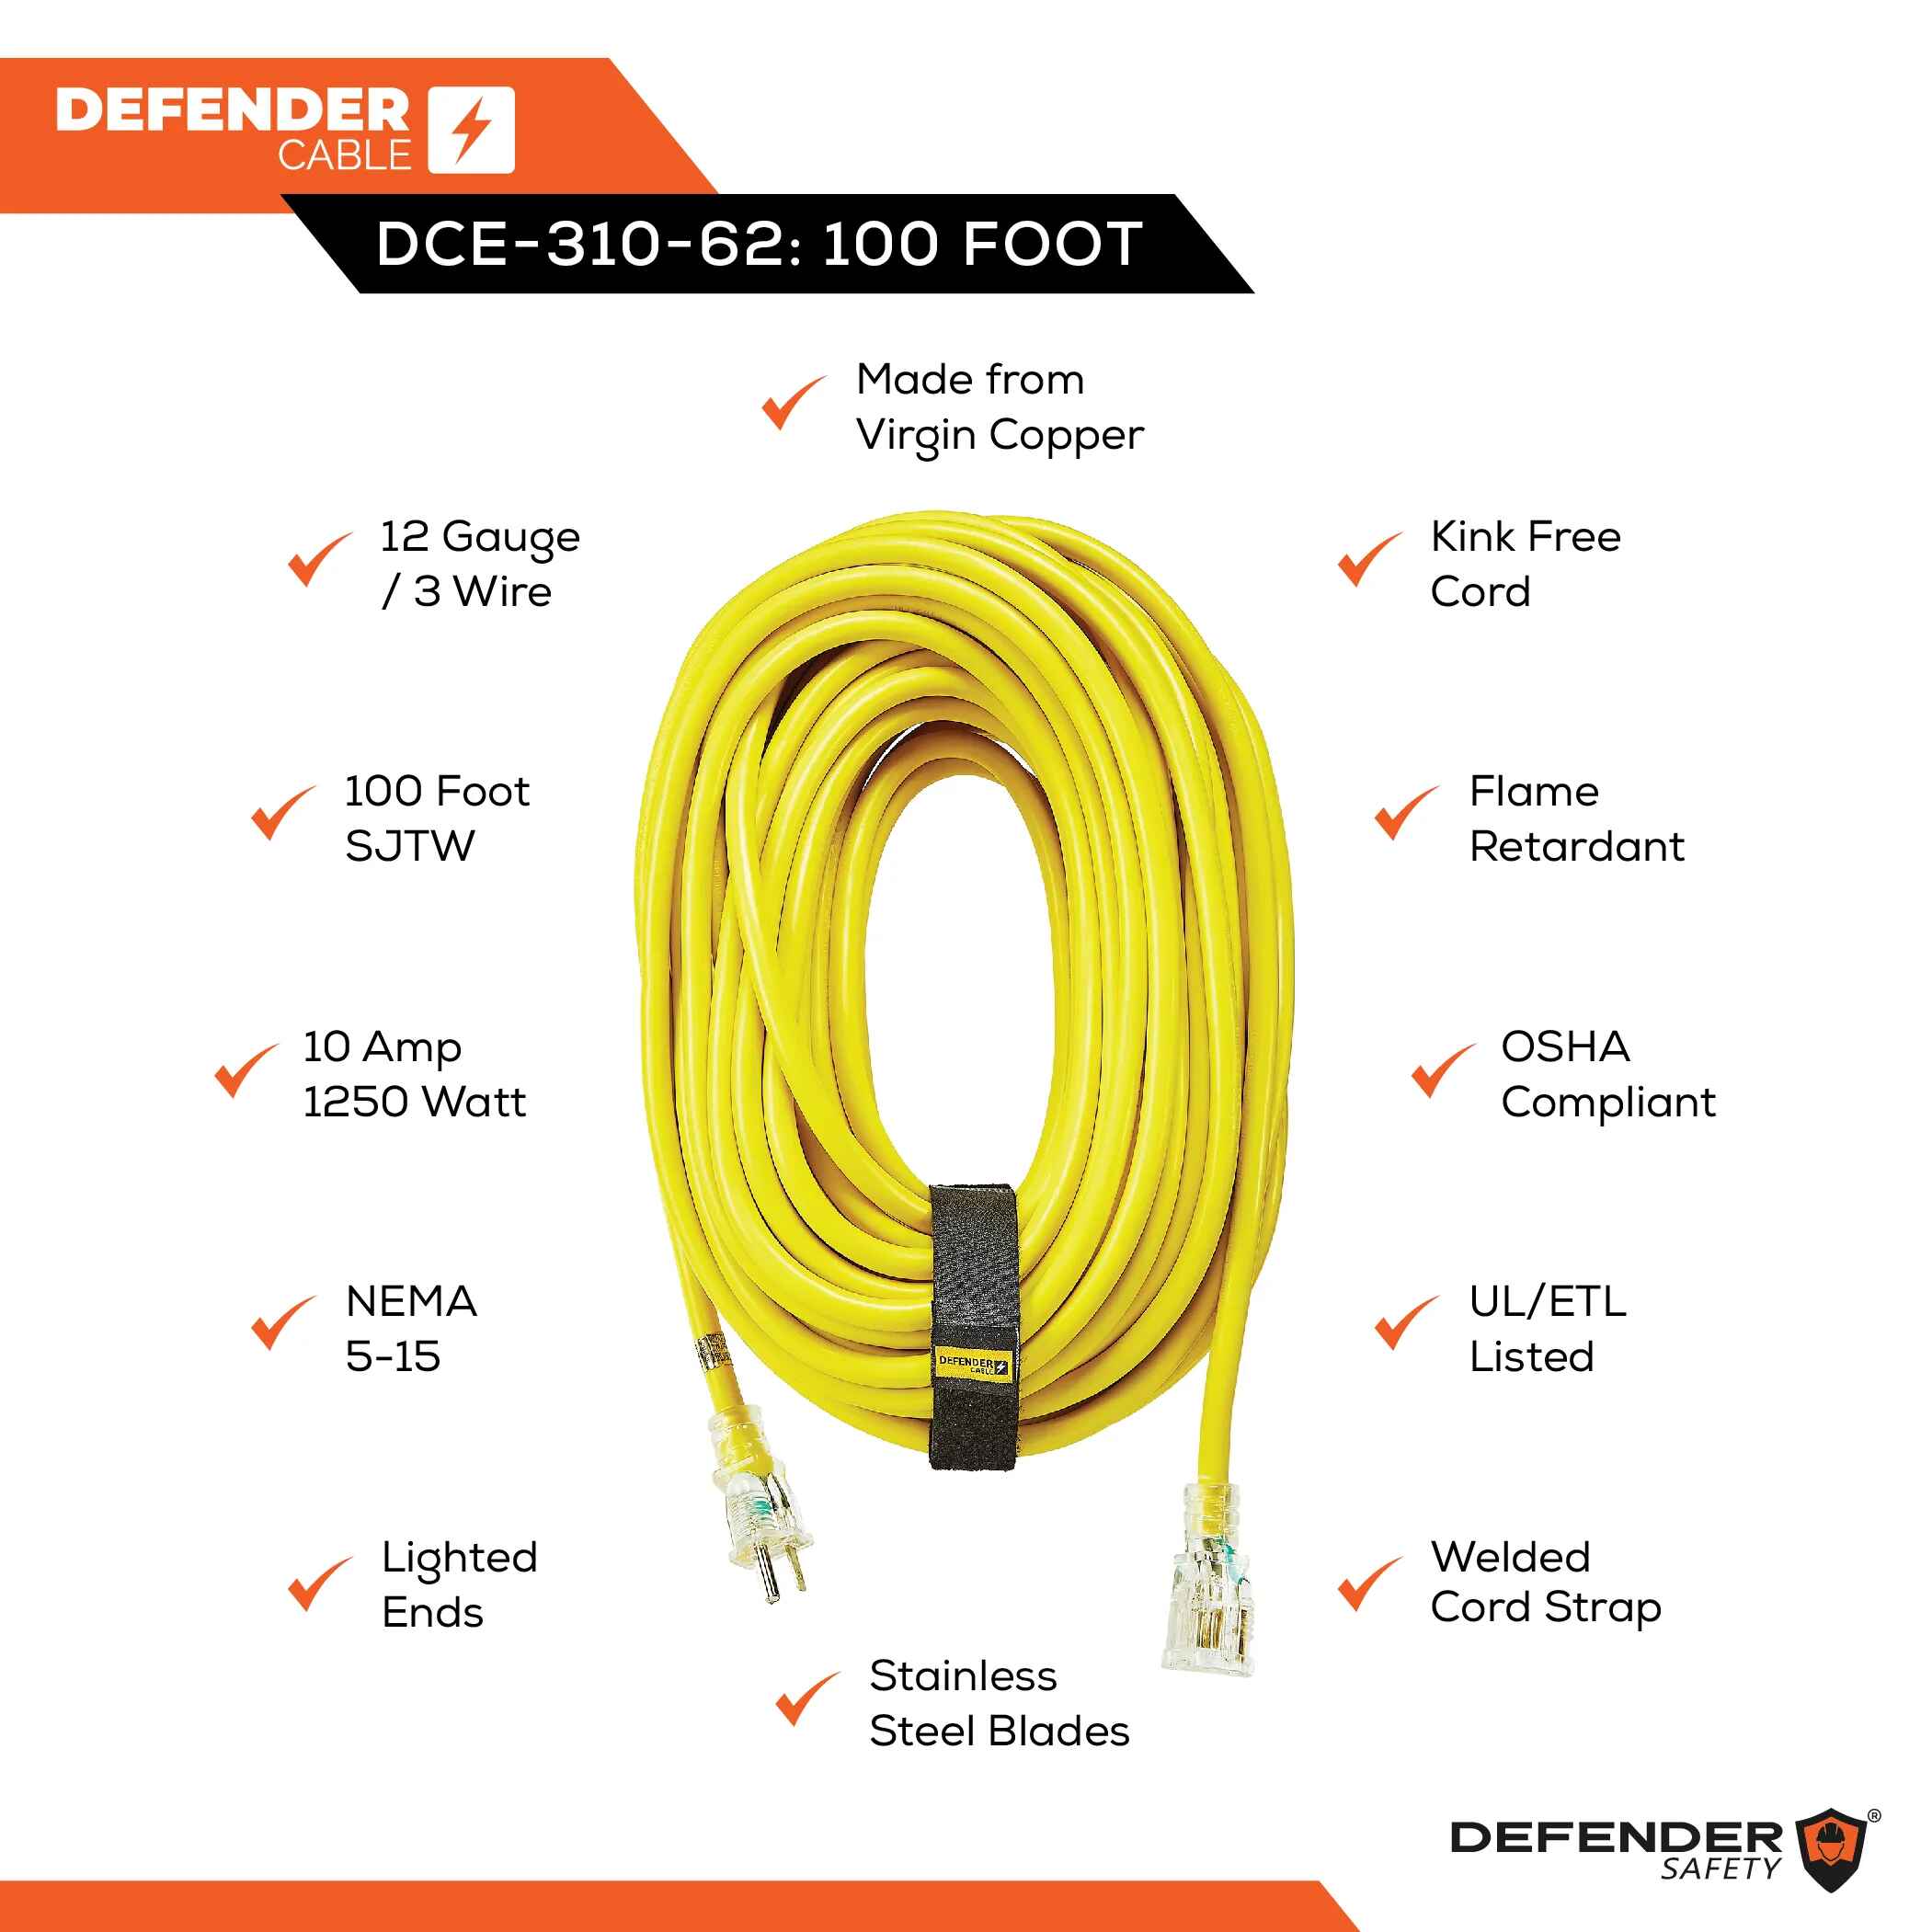 100 ft Outdoor 12/3 Extension Cord, PPE Safety Products